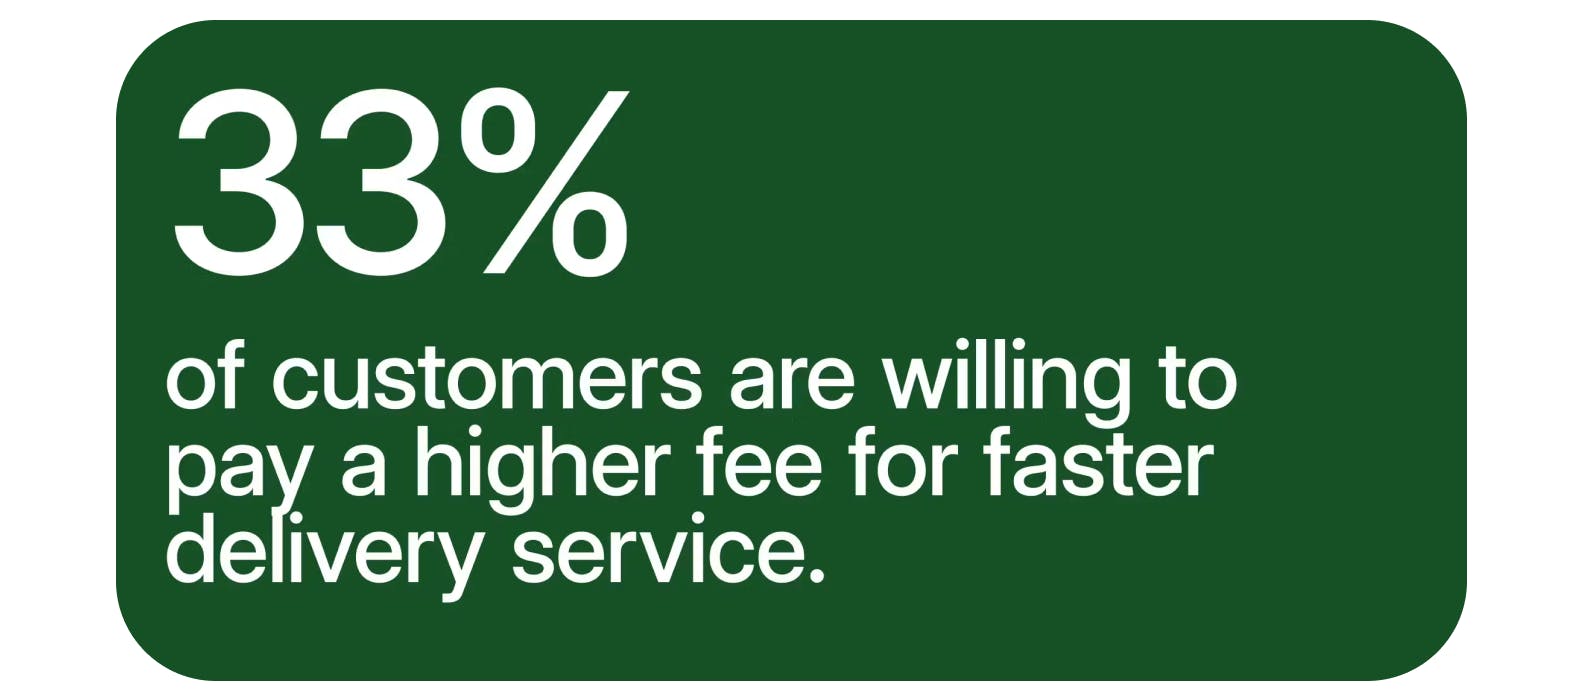 33% of customers are willing to pay a higher fee for faster delivery service.